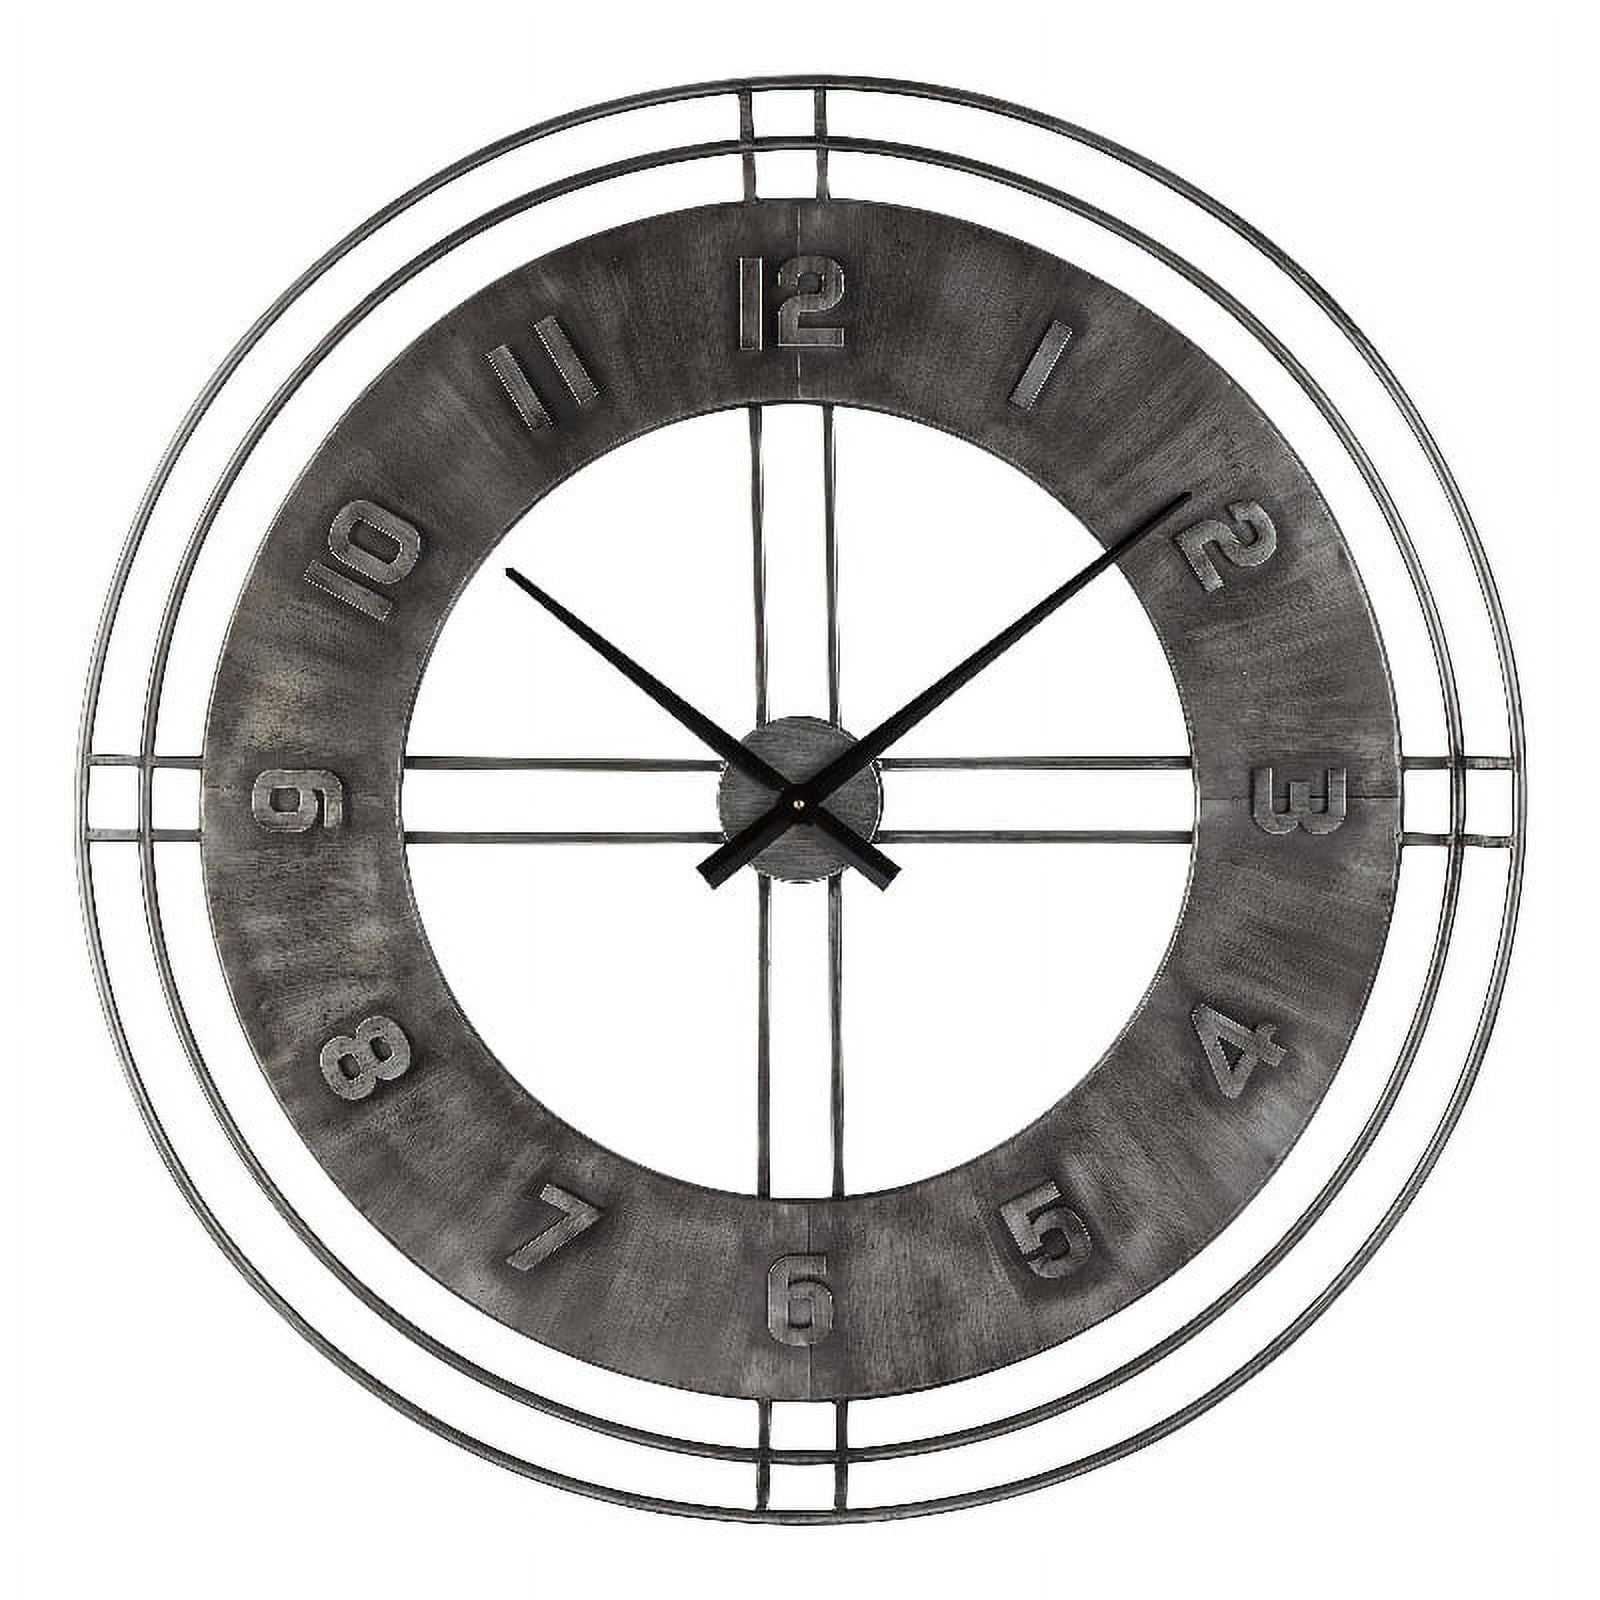 Picture of Benjara BM209373 35.75 x 35.75 x 3 in. Industrial Round Metal Wall Clock with Roman Numerals, Gray